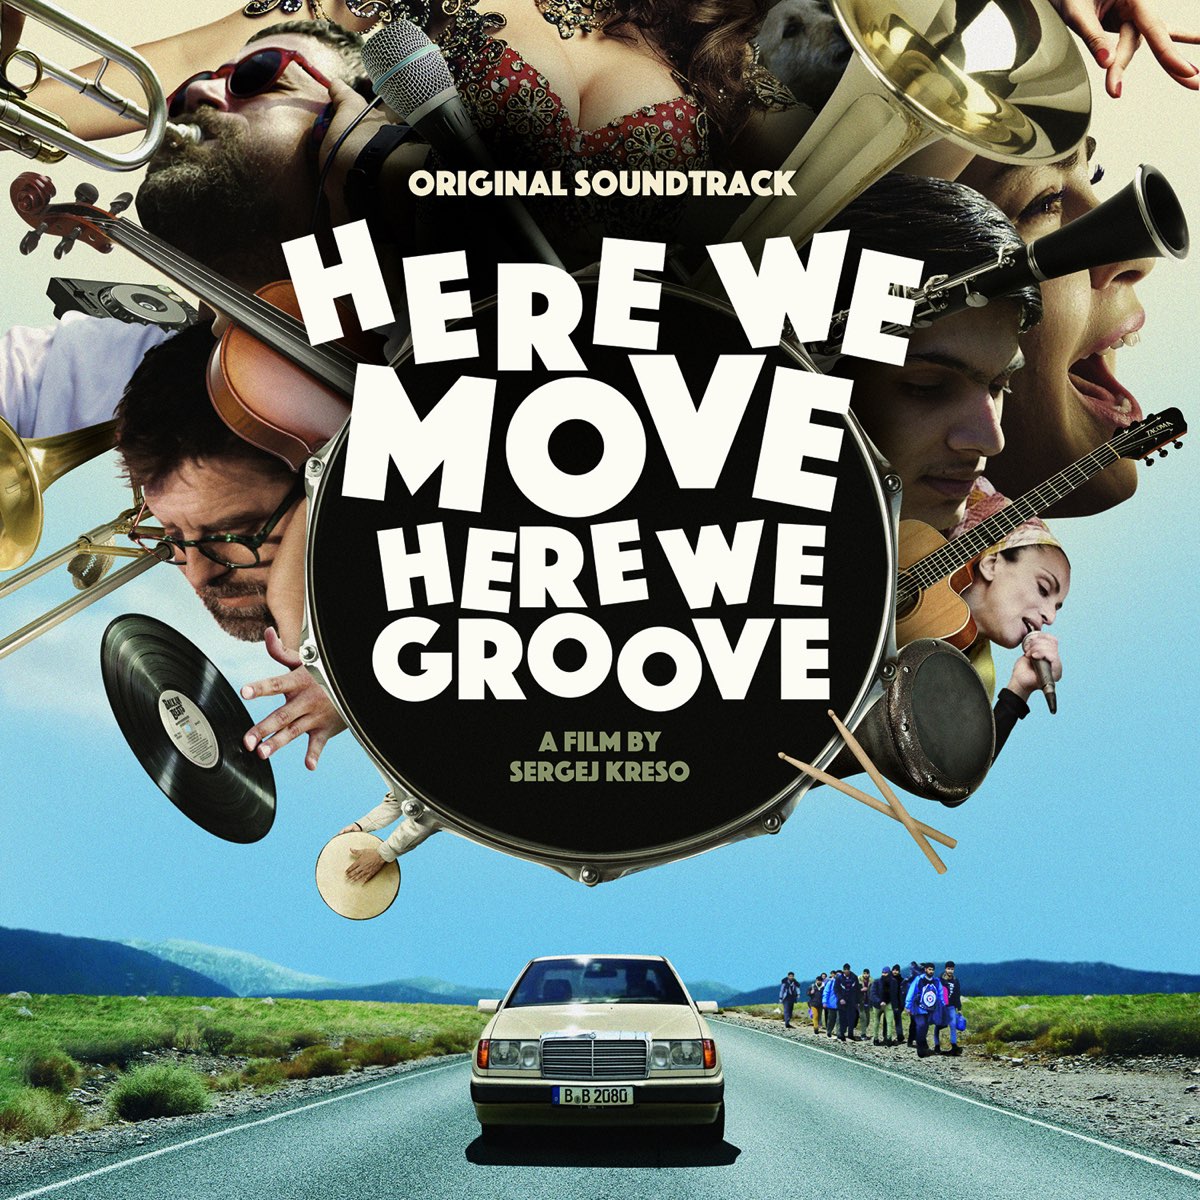 Here We Move - Here We Groove (Original Motion Picture Soundtrack) by  BalkanBeats Soundsystem, Watcha Clan & Jall aux Yeux on Apple Music